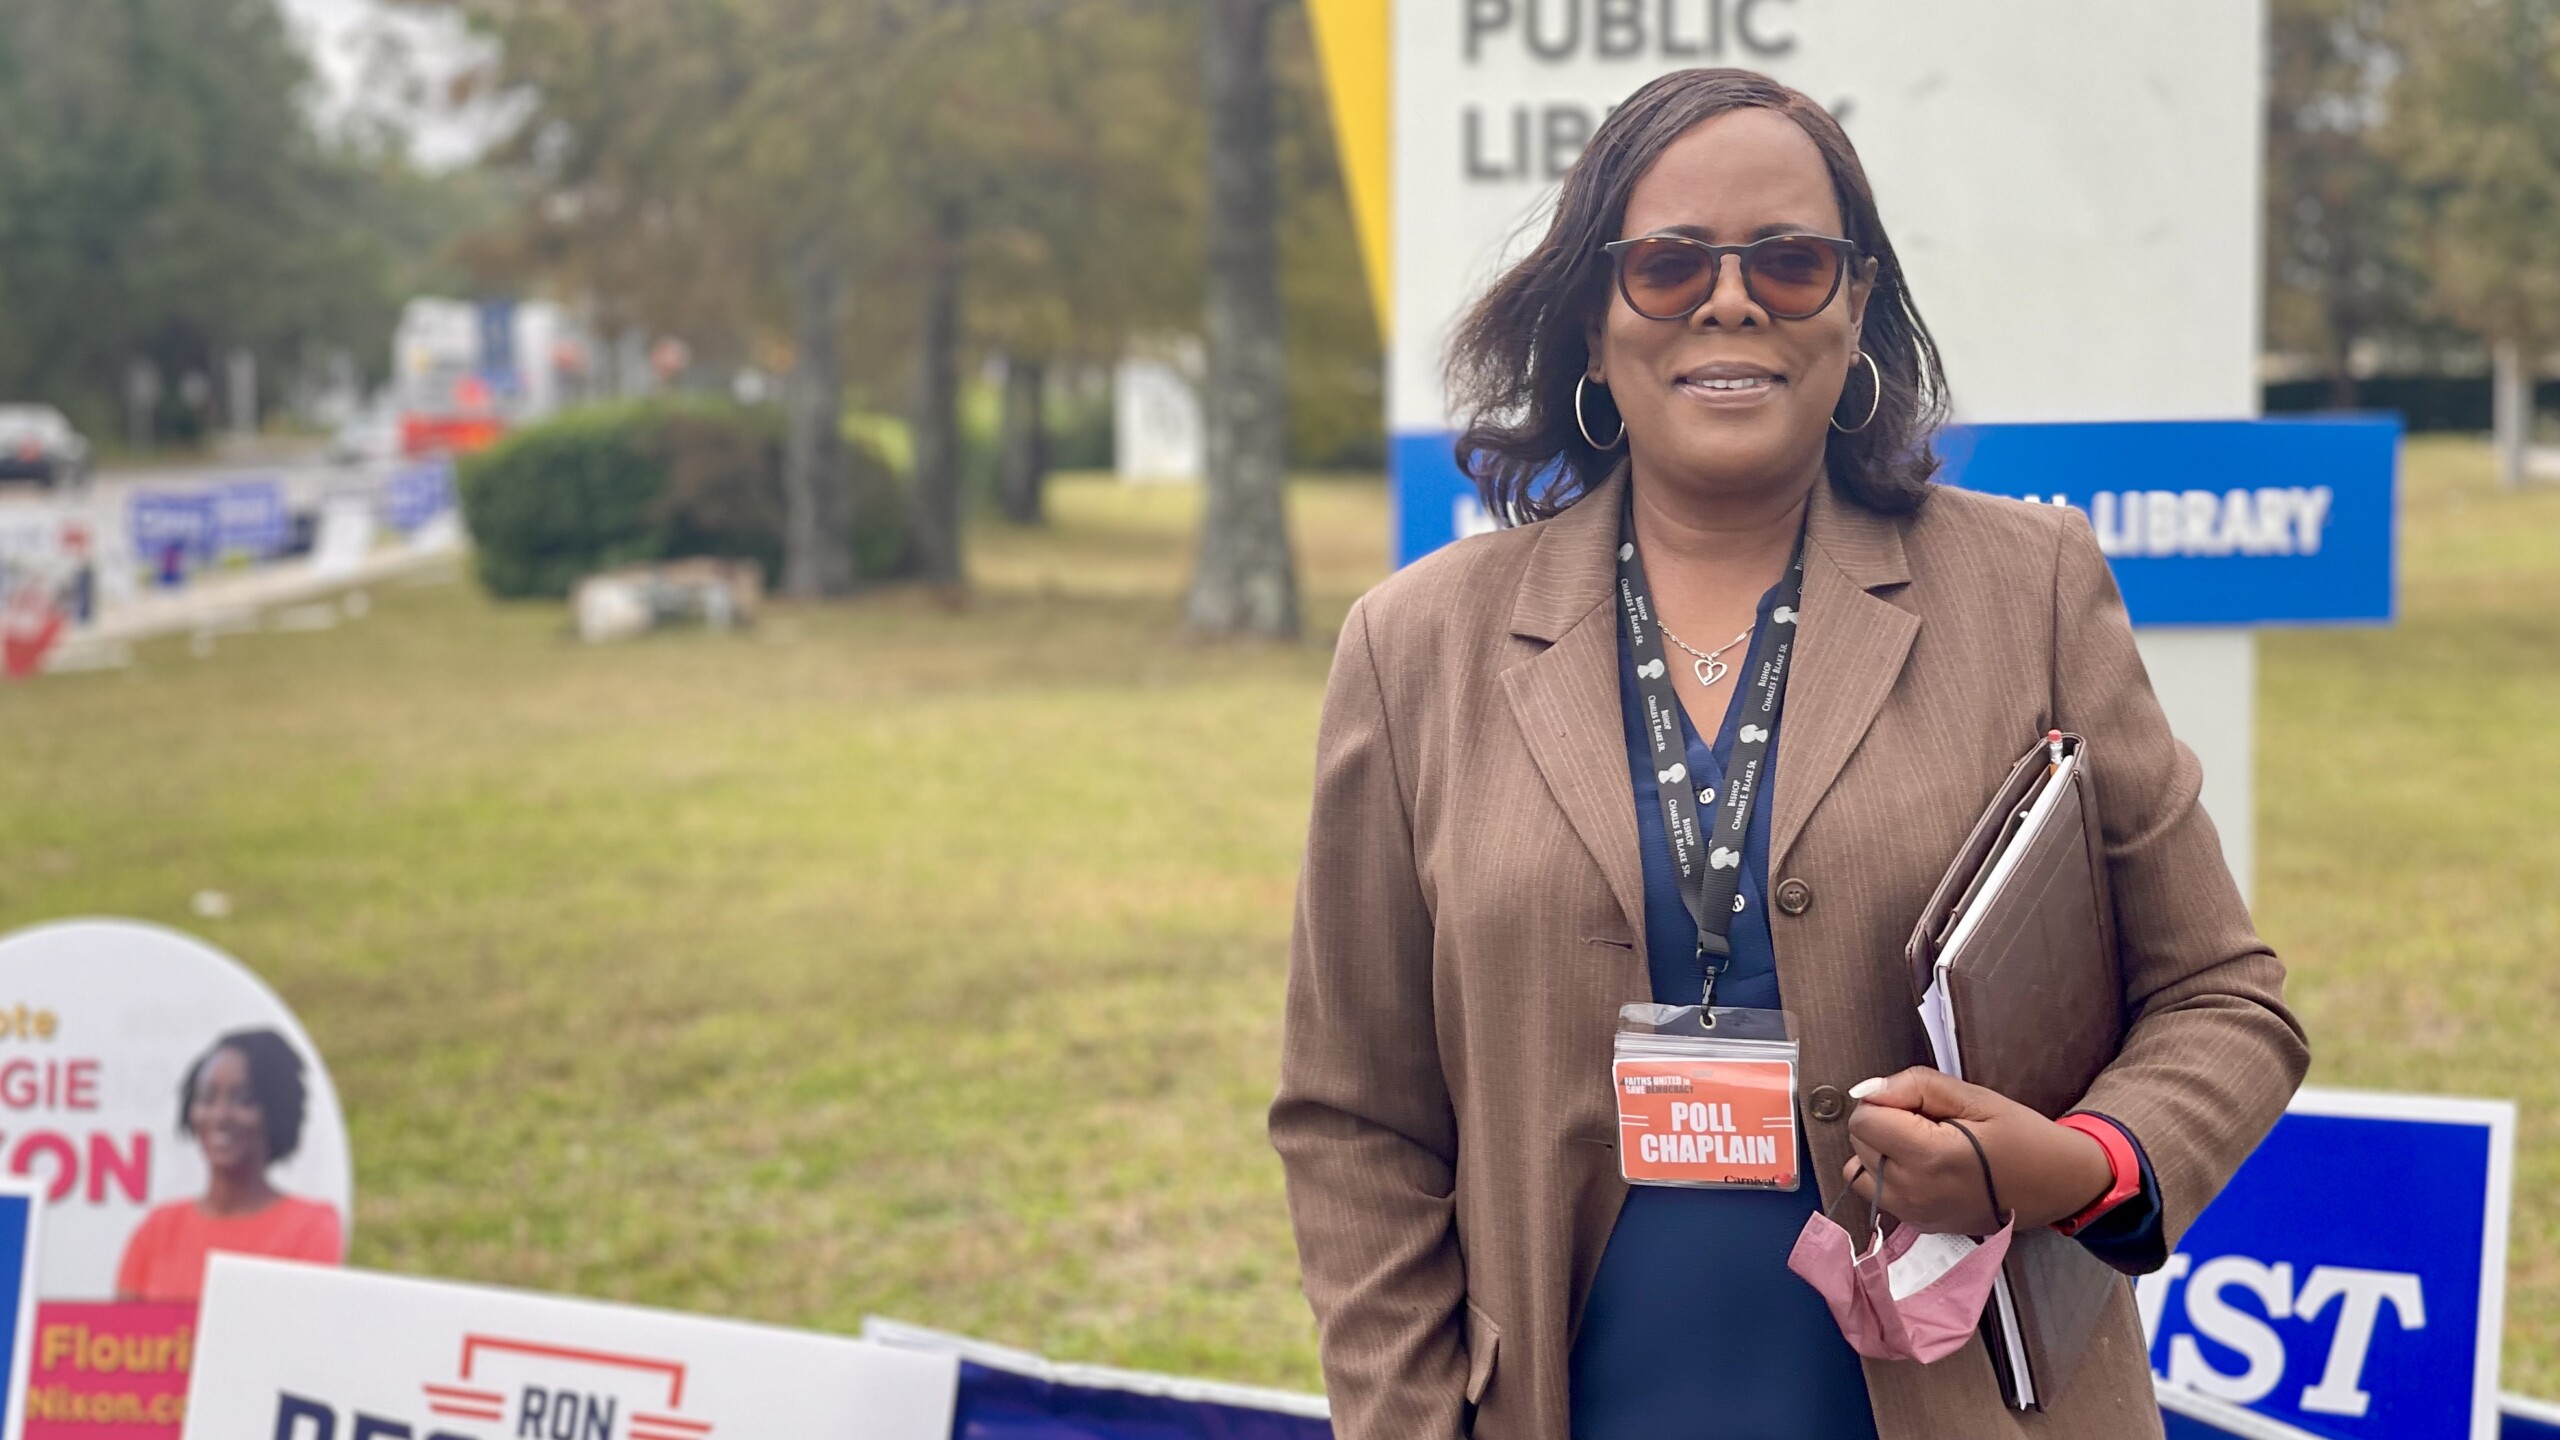 “Poll chaplain” Doris Rodgers volunteered for a three-hour shift during early voting, after completing an online training with Faiths United to Save Democracy.